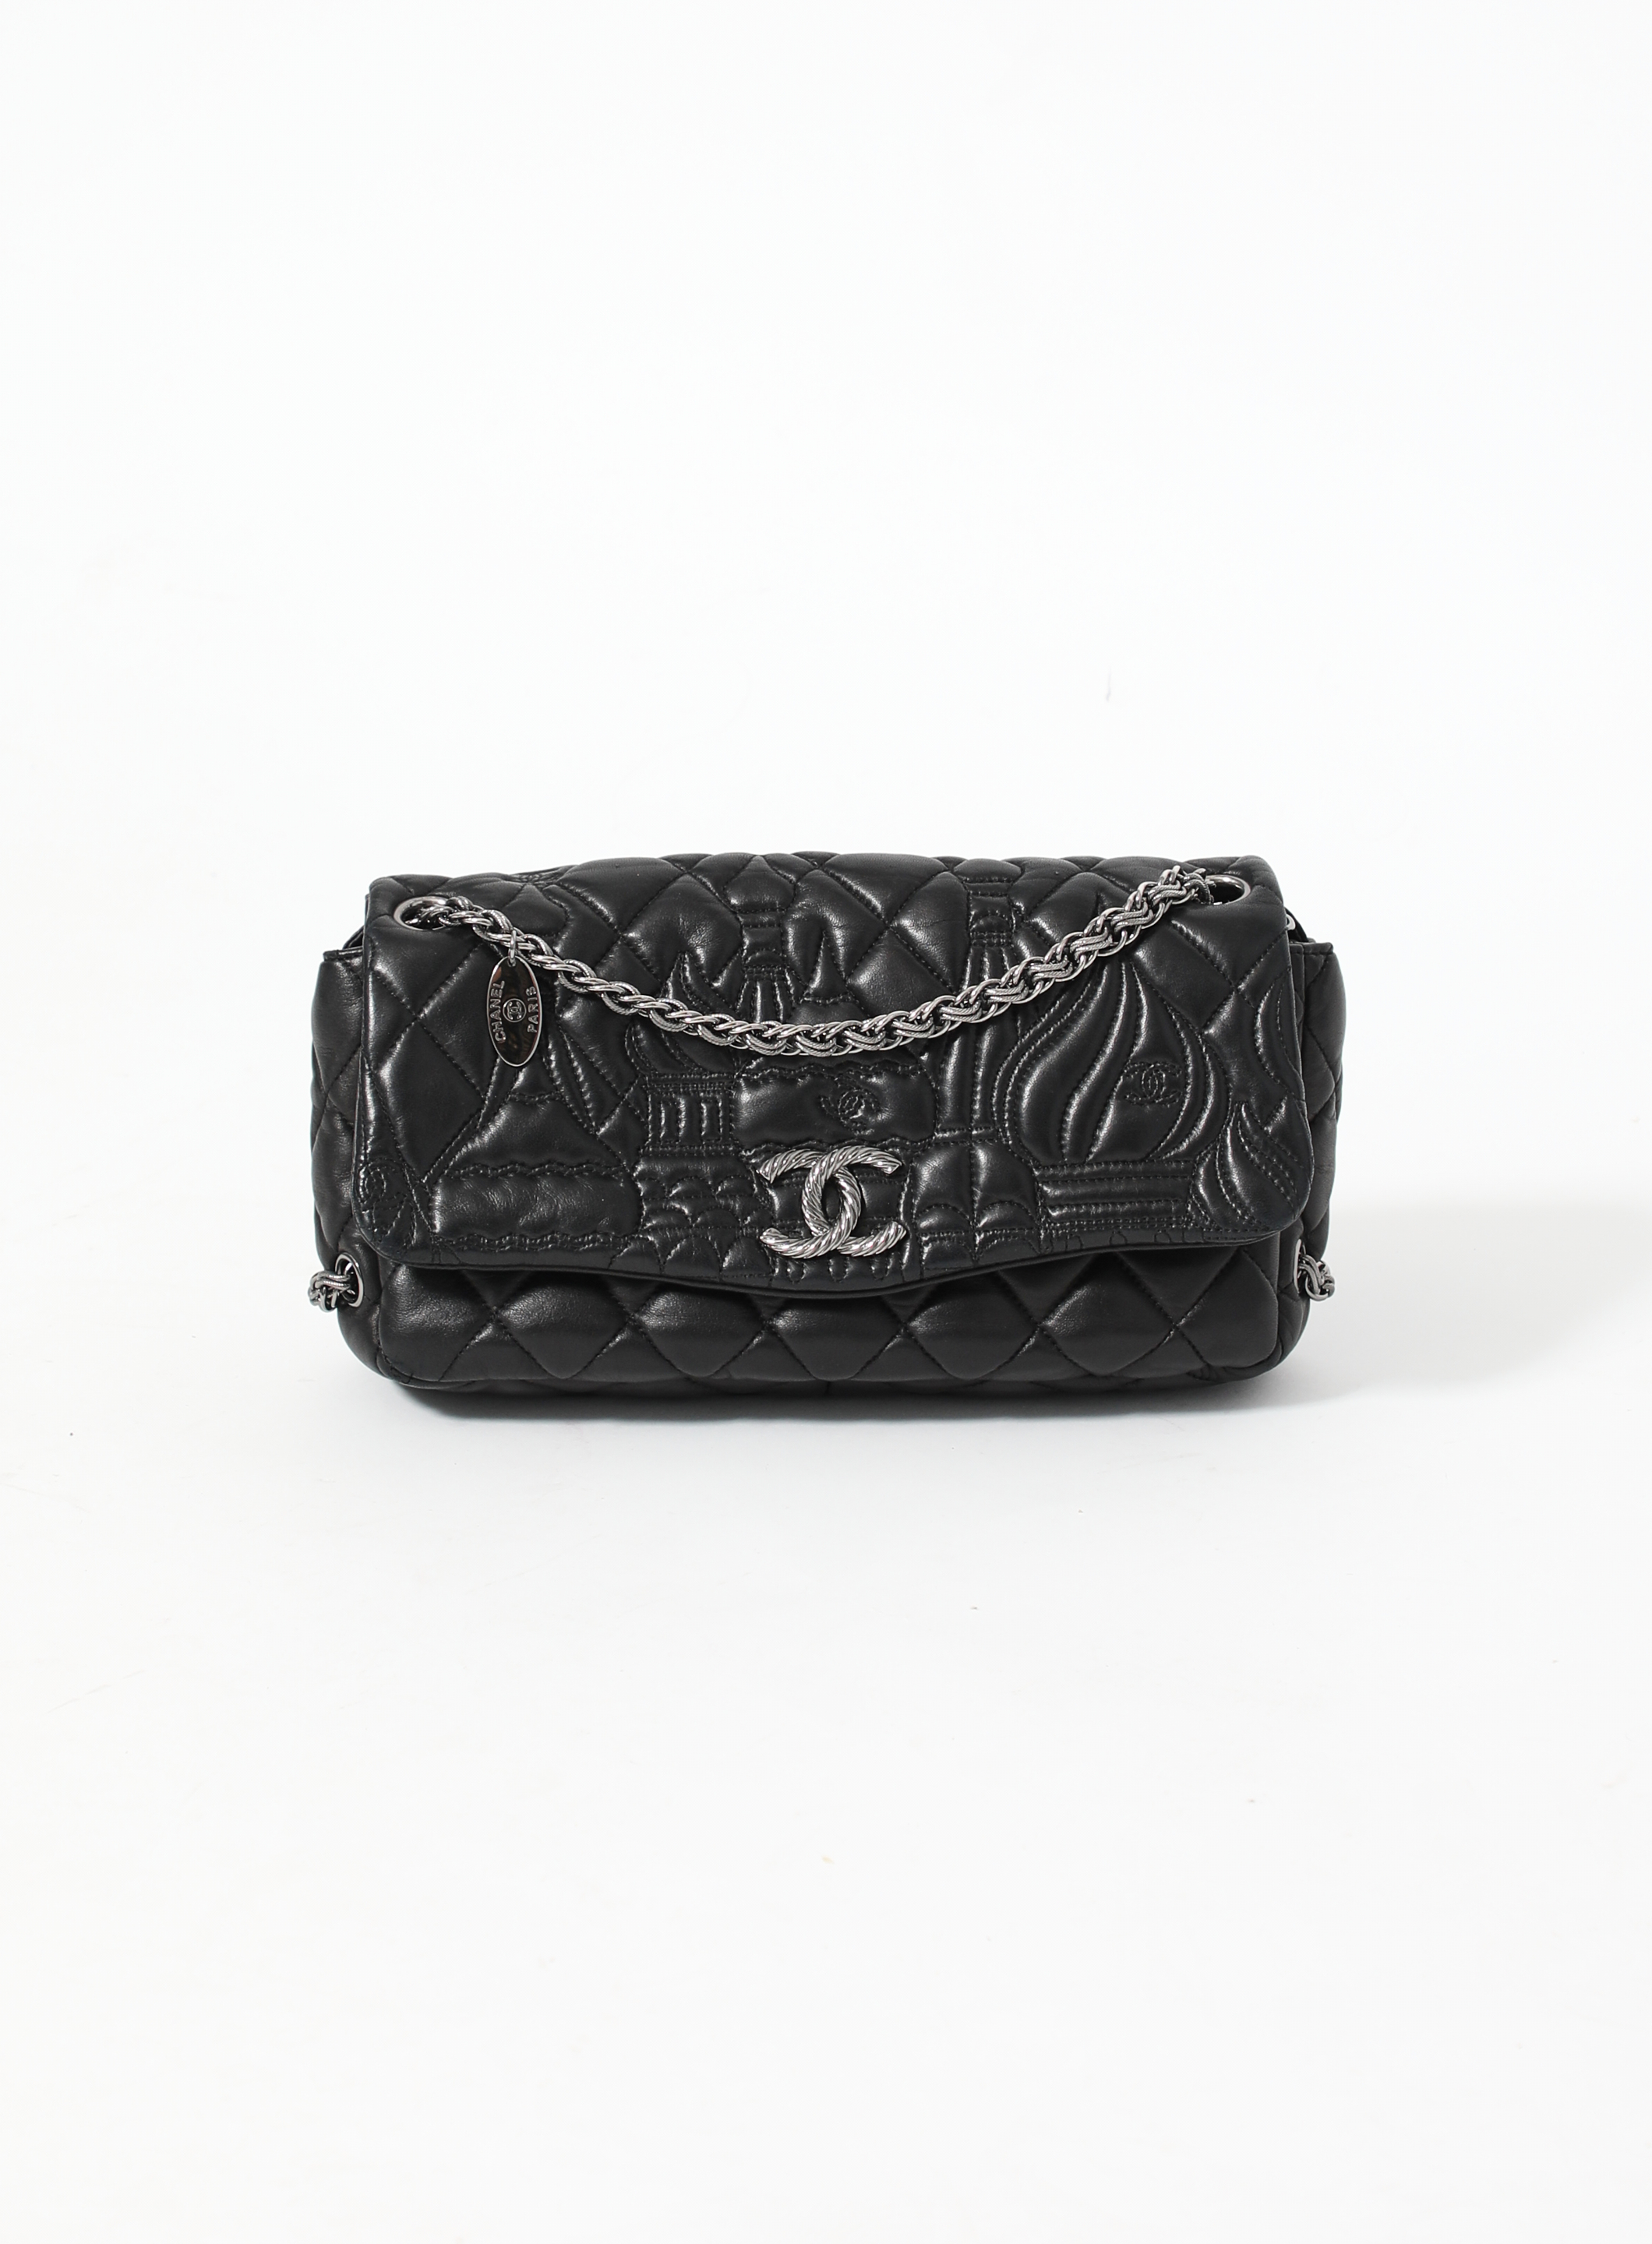 Chanel-Limited-Edition-Karl-Lagerfeld-Sketch-Classic-Flap-Bag1